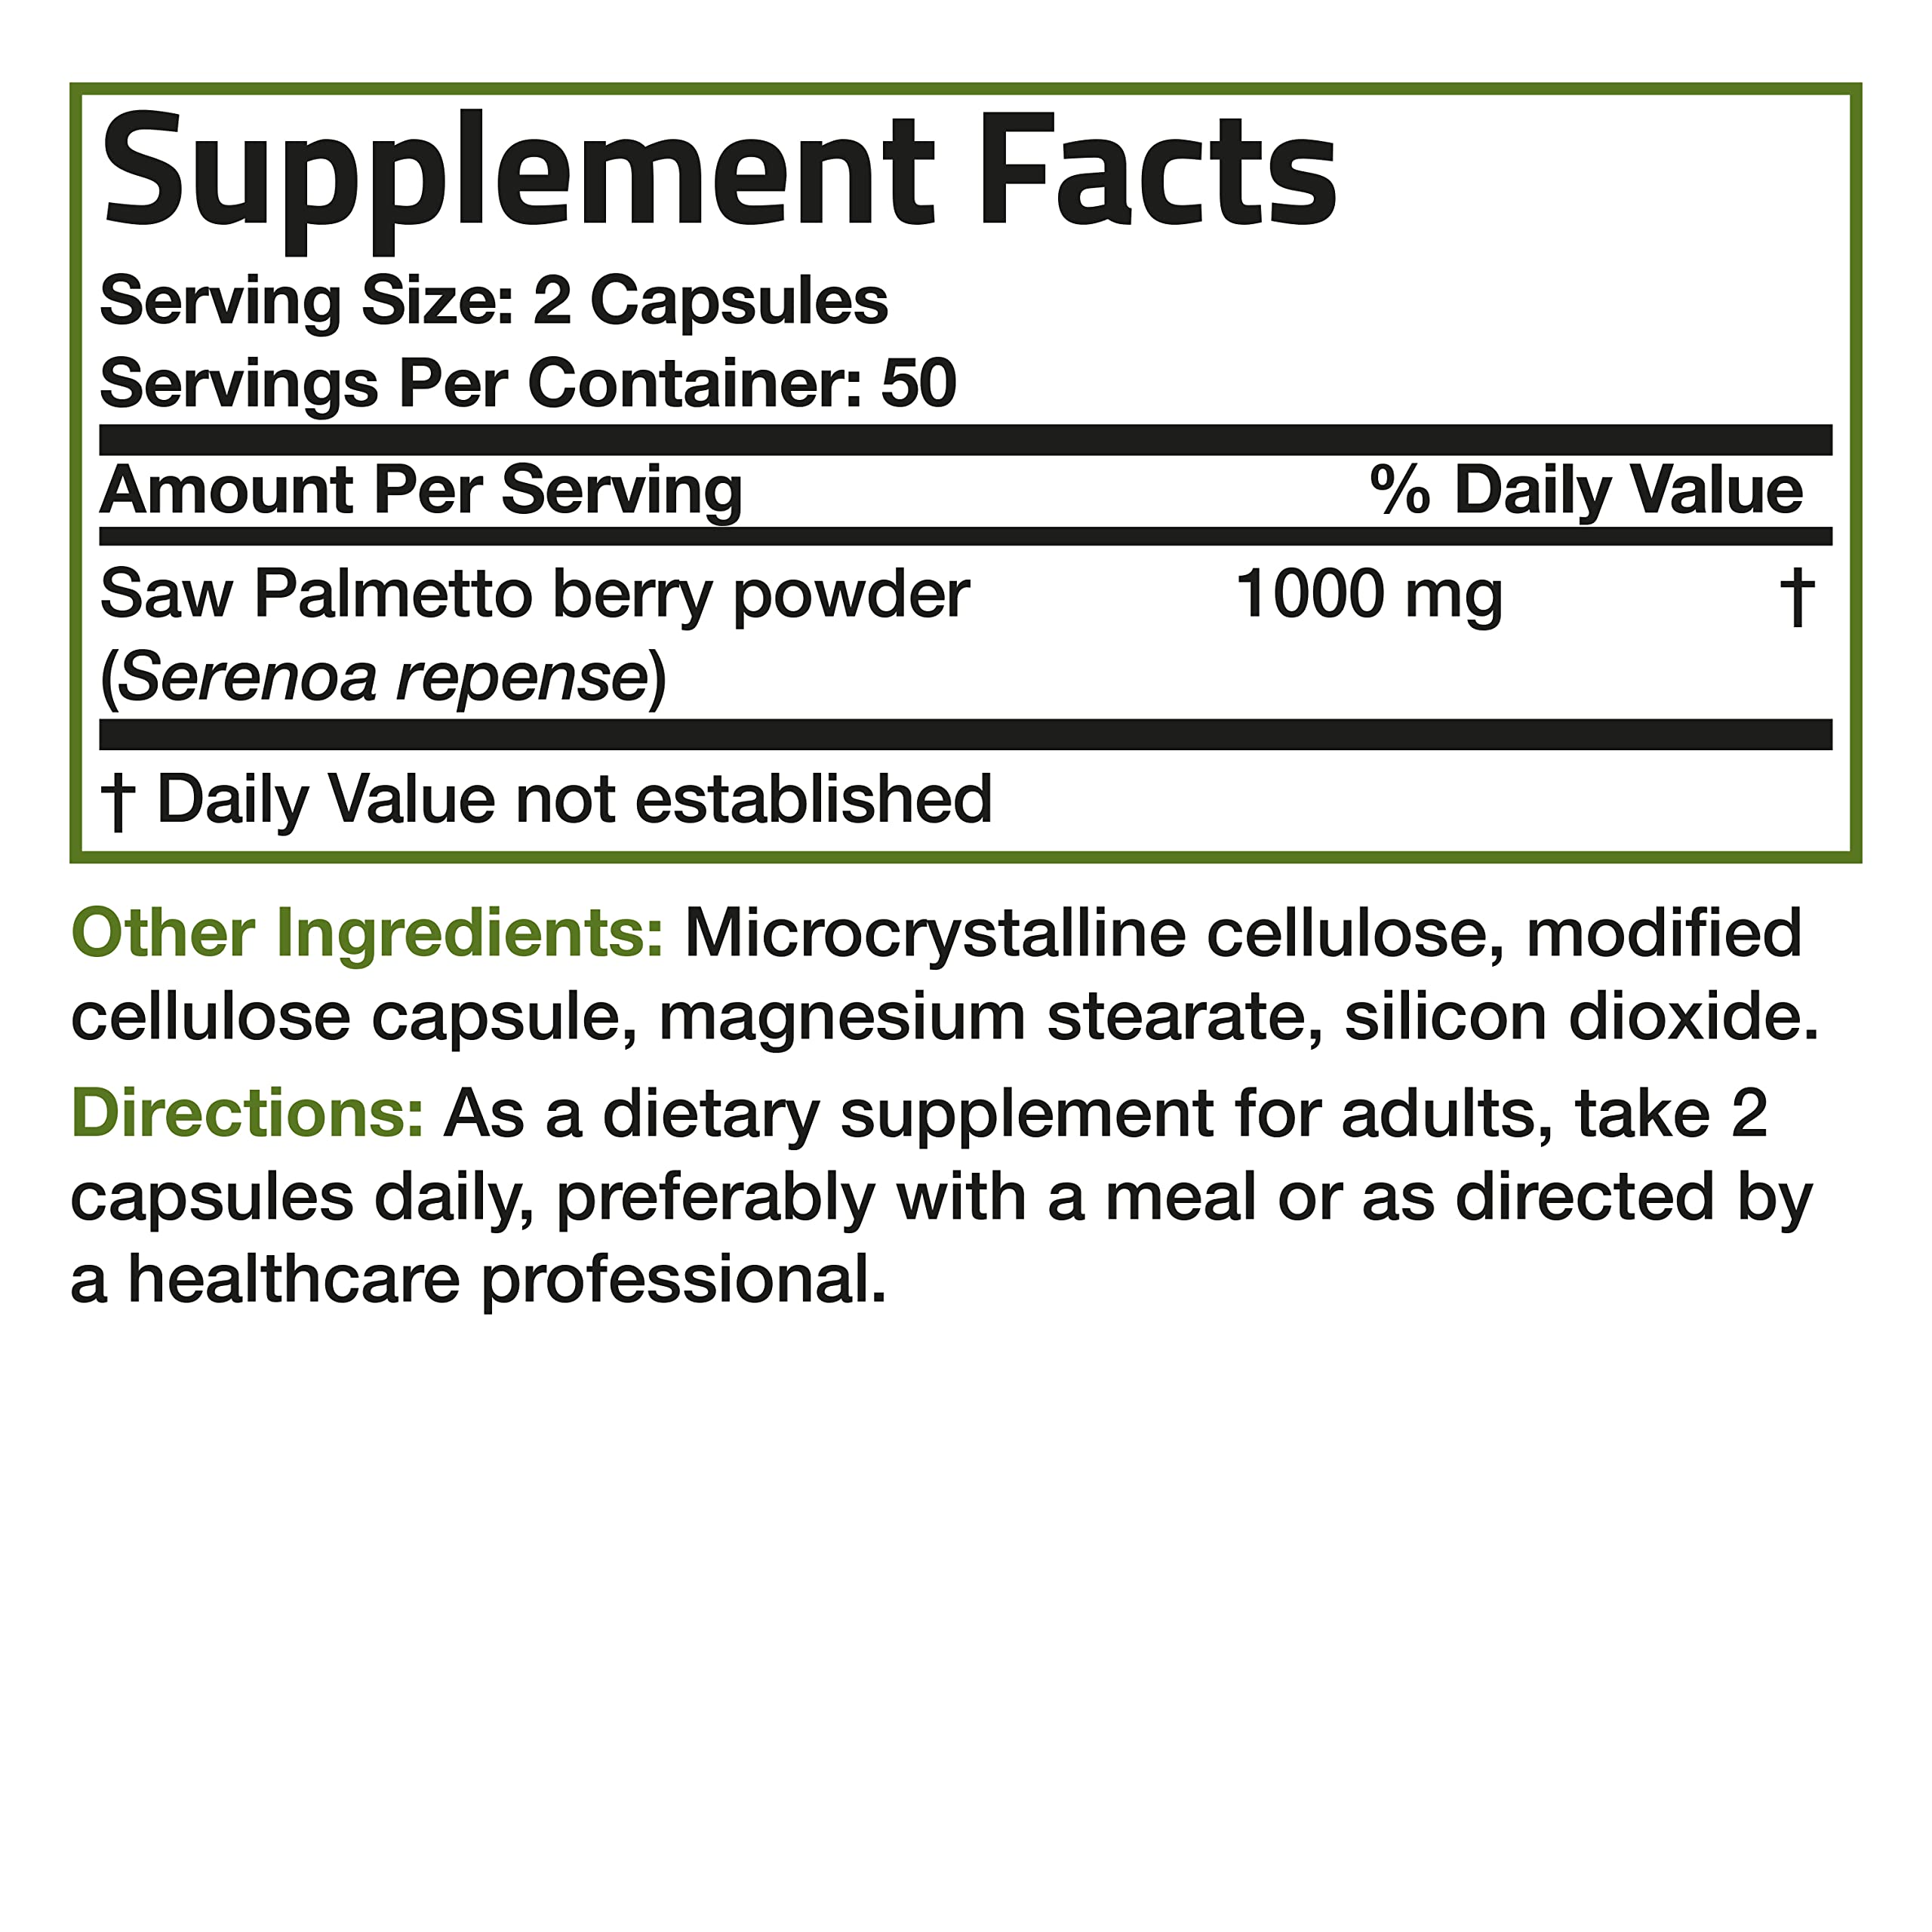 Saw Palmetto Extract Capsules